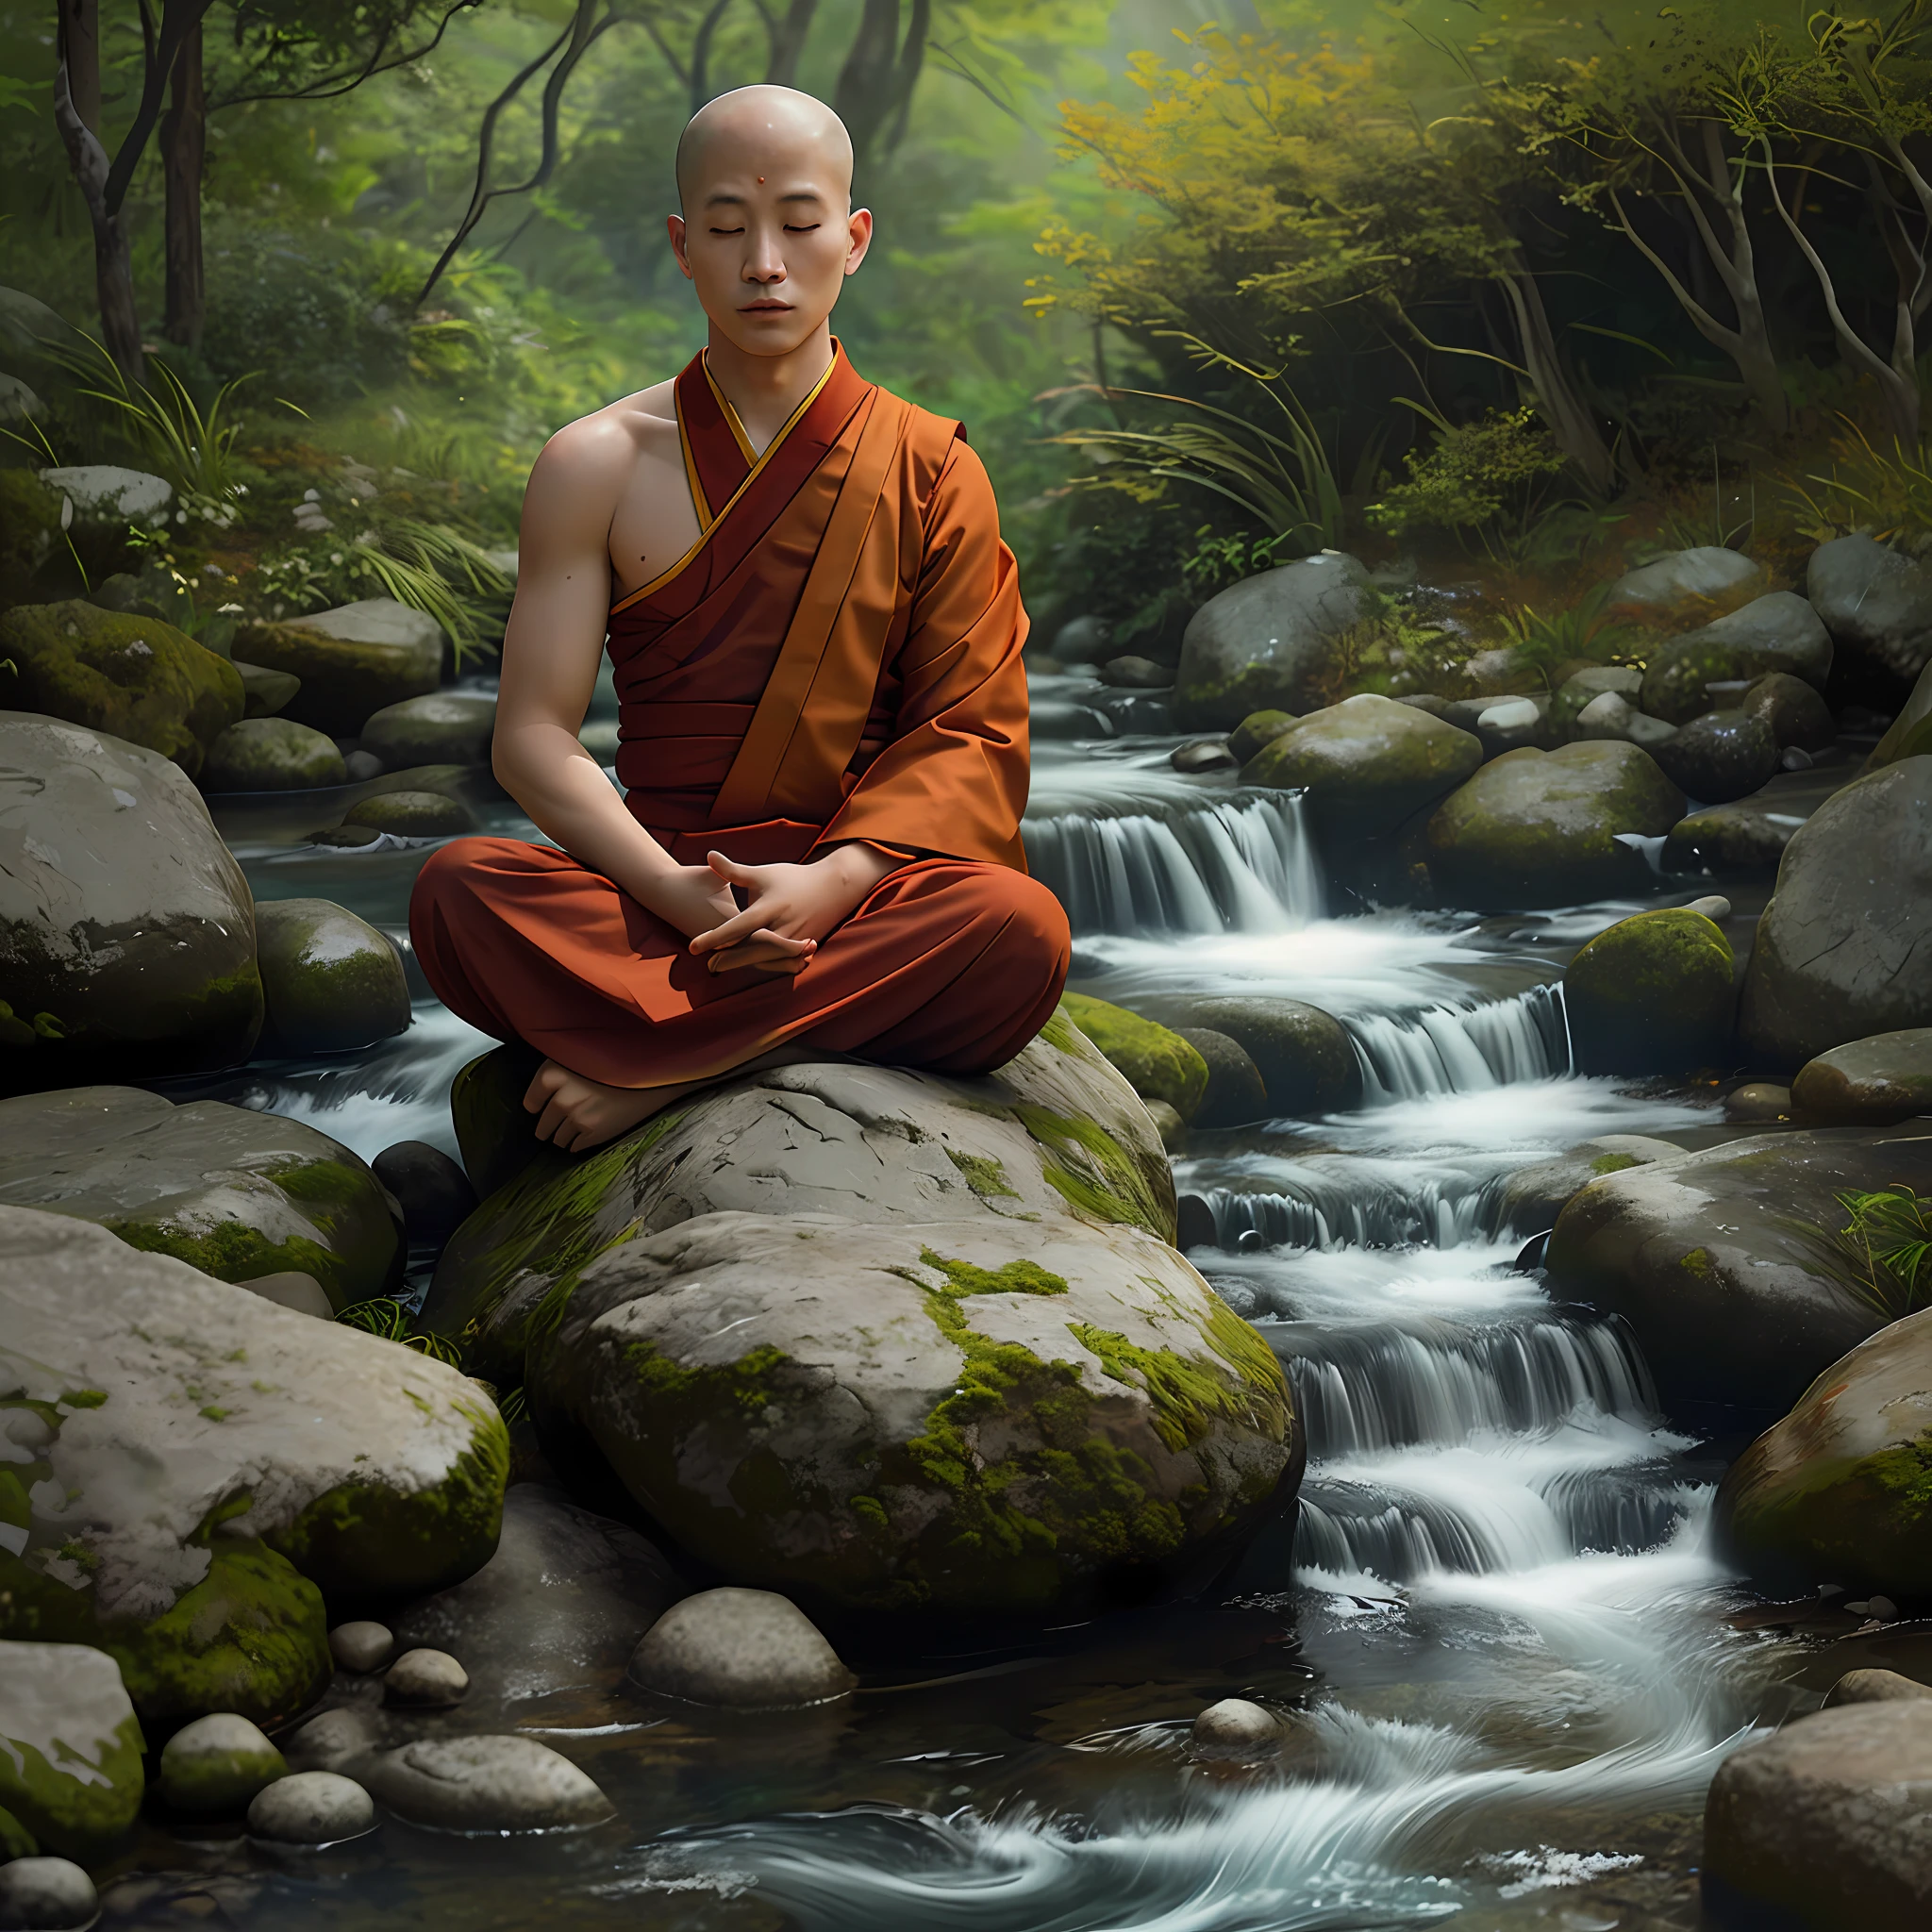 A Buddhist monk meditating By the stream, his coral-colored threads are coming out The facial expression is peaceful, cinematic lighting hyper realistic super details skin texture is very detail